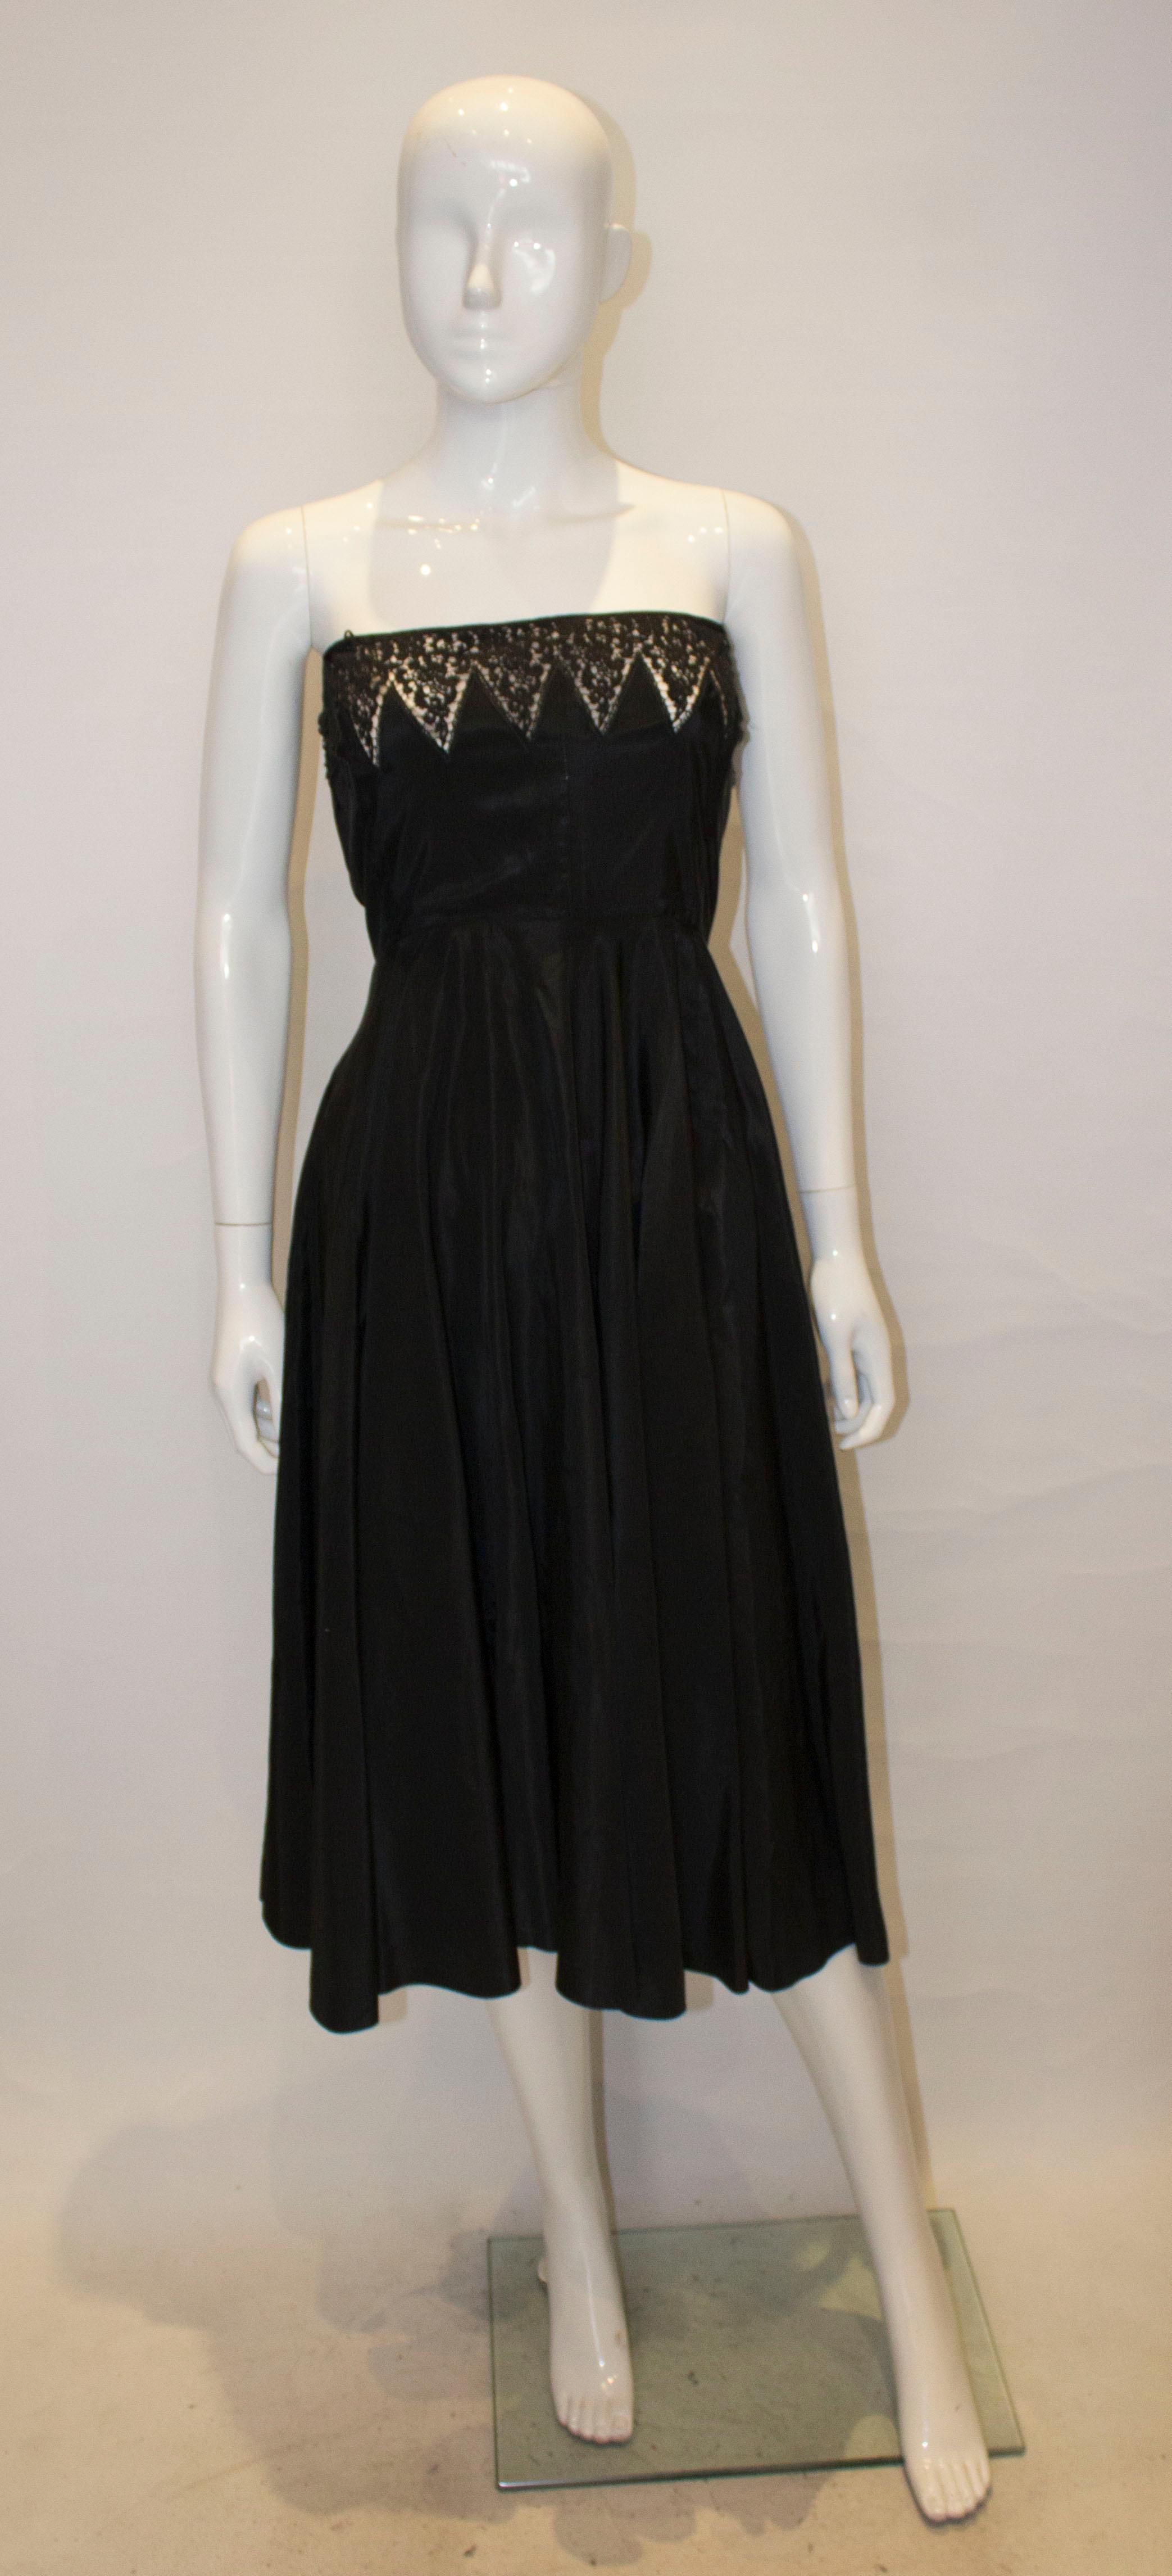 A chic black vintage cocktail dress from the 1950s., The dress is strapless, but straps could easily be added with lace detail on the bust area. It has a side zip opening and a flared skirt.